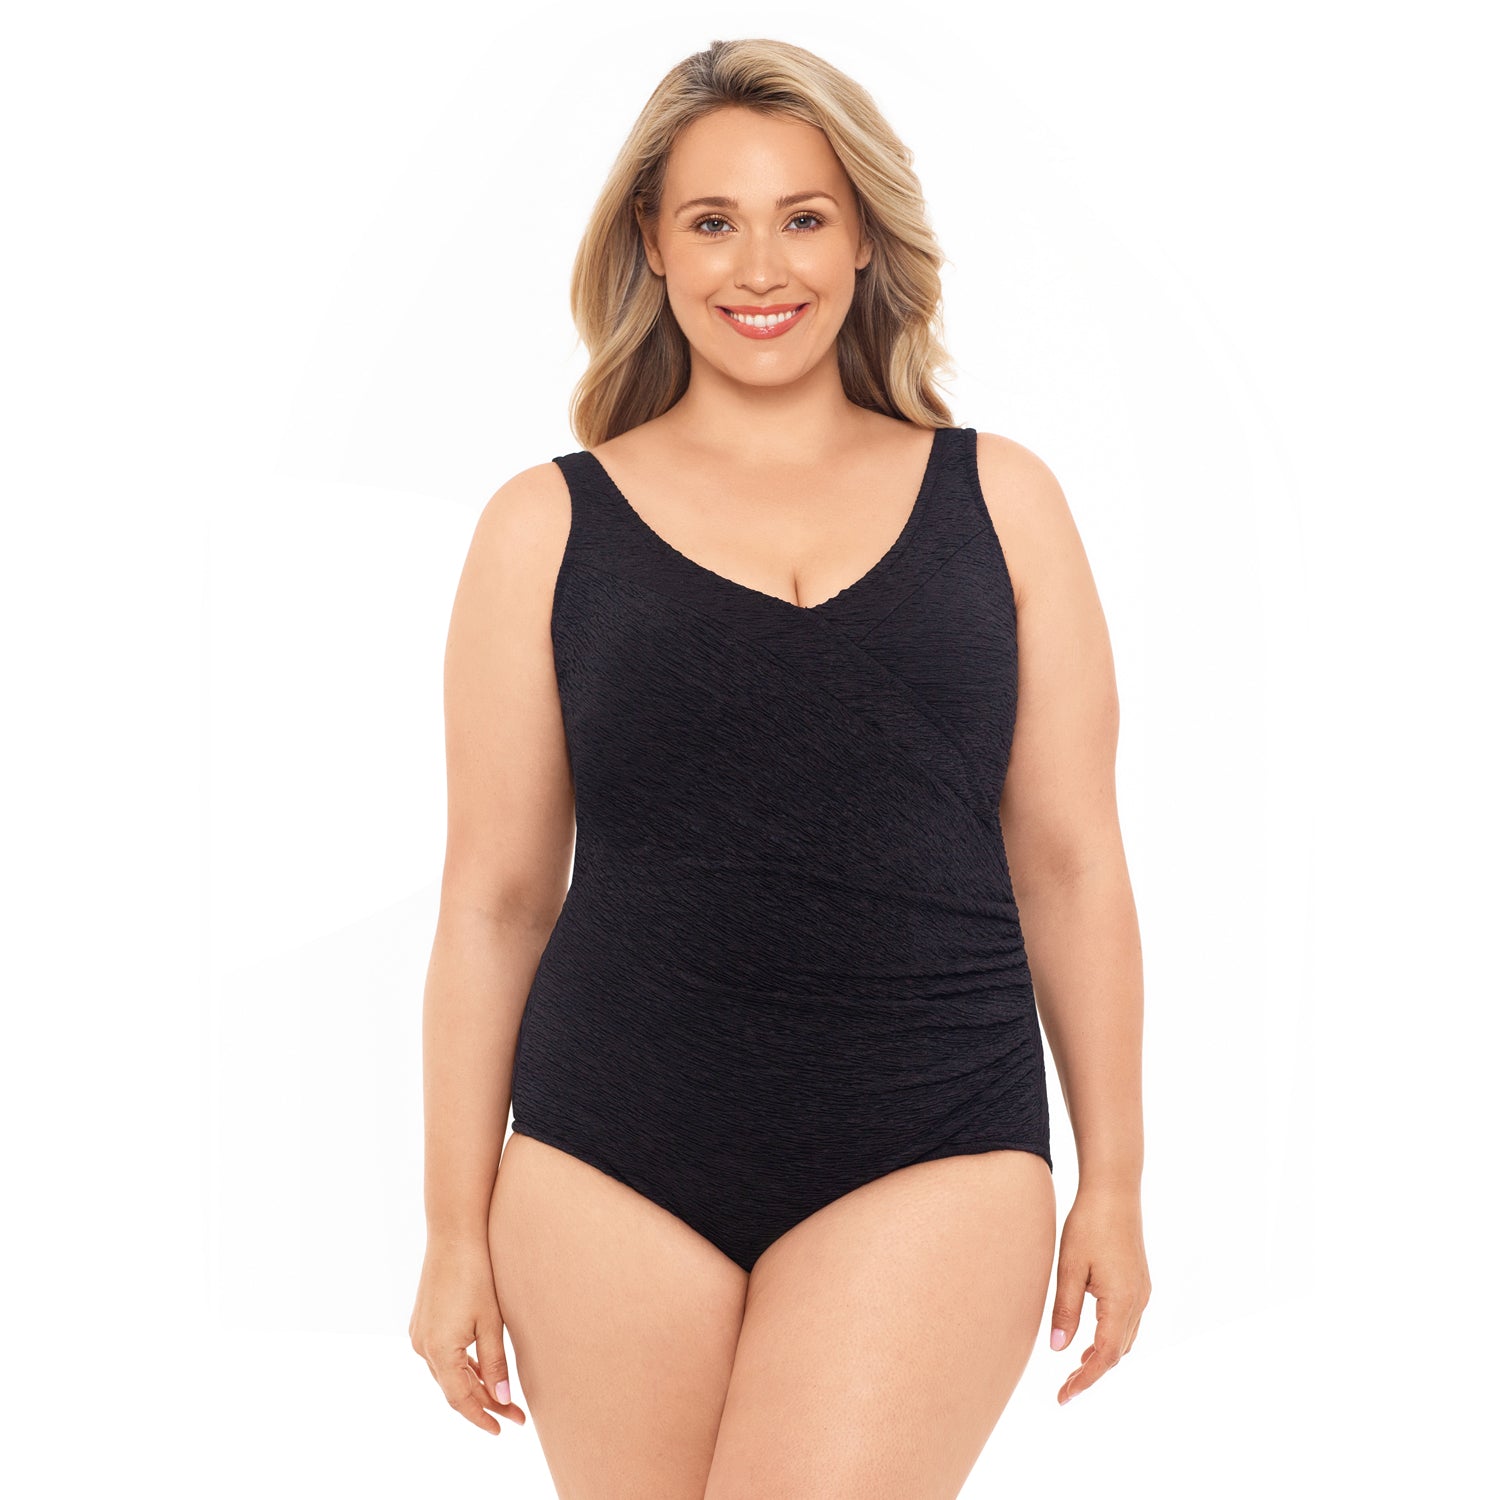 Chlorine Resistant Plus Size Swimsuits - Krinkle Suits 70080 Royal